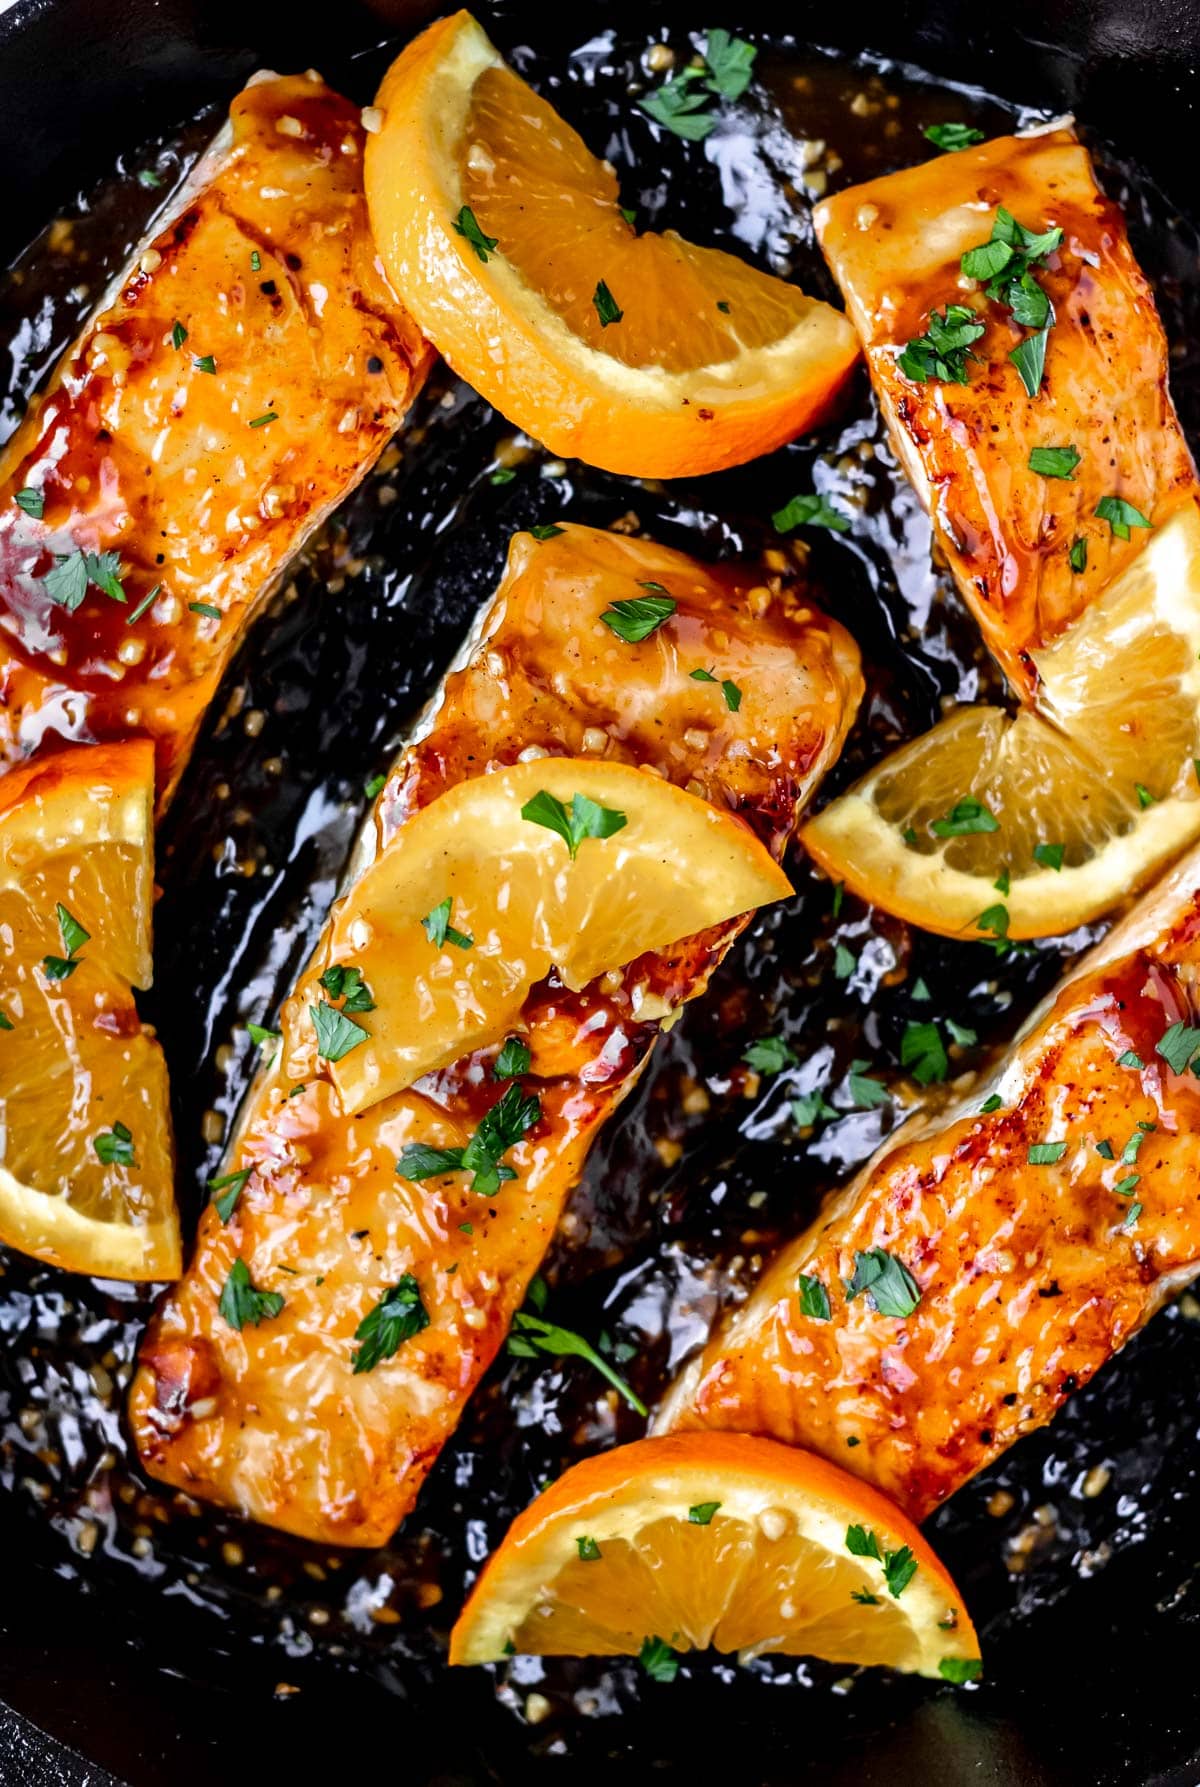 Filets of orange salmon and orange slices in a cast iron pan.